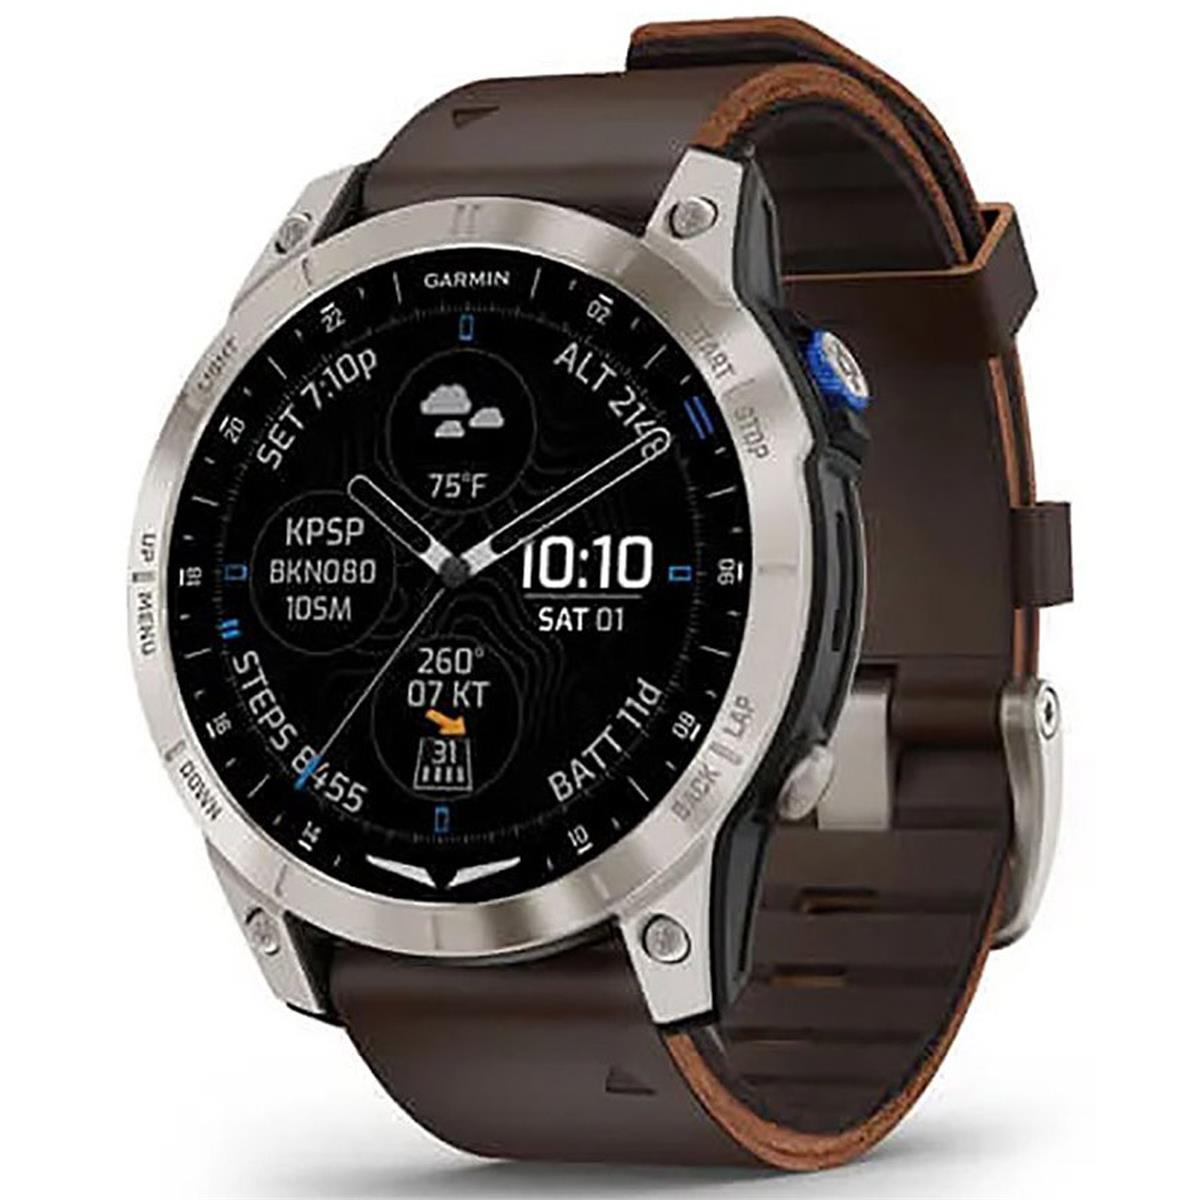 Image of Garmin D2 Mach 1 GPS Aviator Smartwatch with Oxford Brown Leather Band